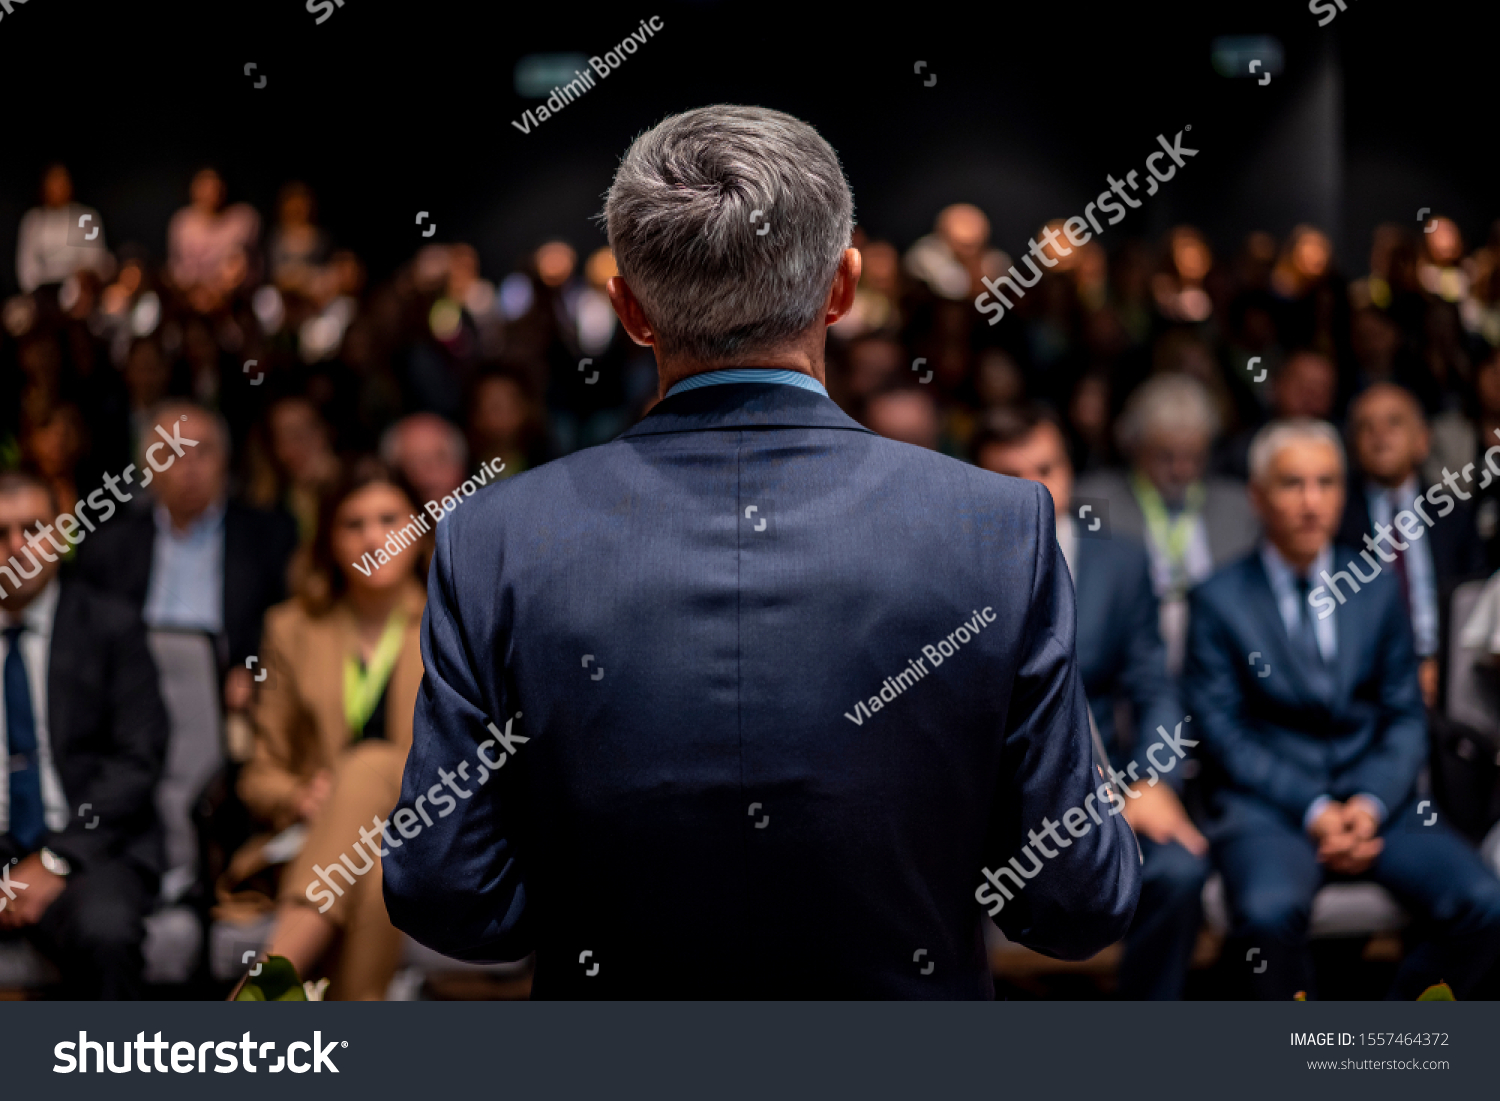 Business man is making a speech in front of a big audience at a conference hall. Speaker giving a talk on corporate business or political conference. Politician talking to group of people #1557464372